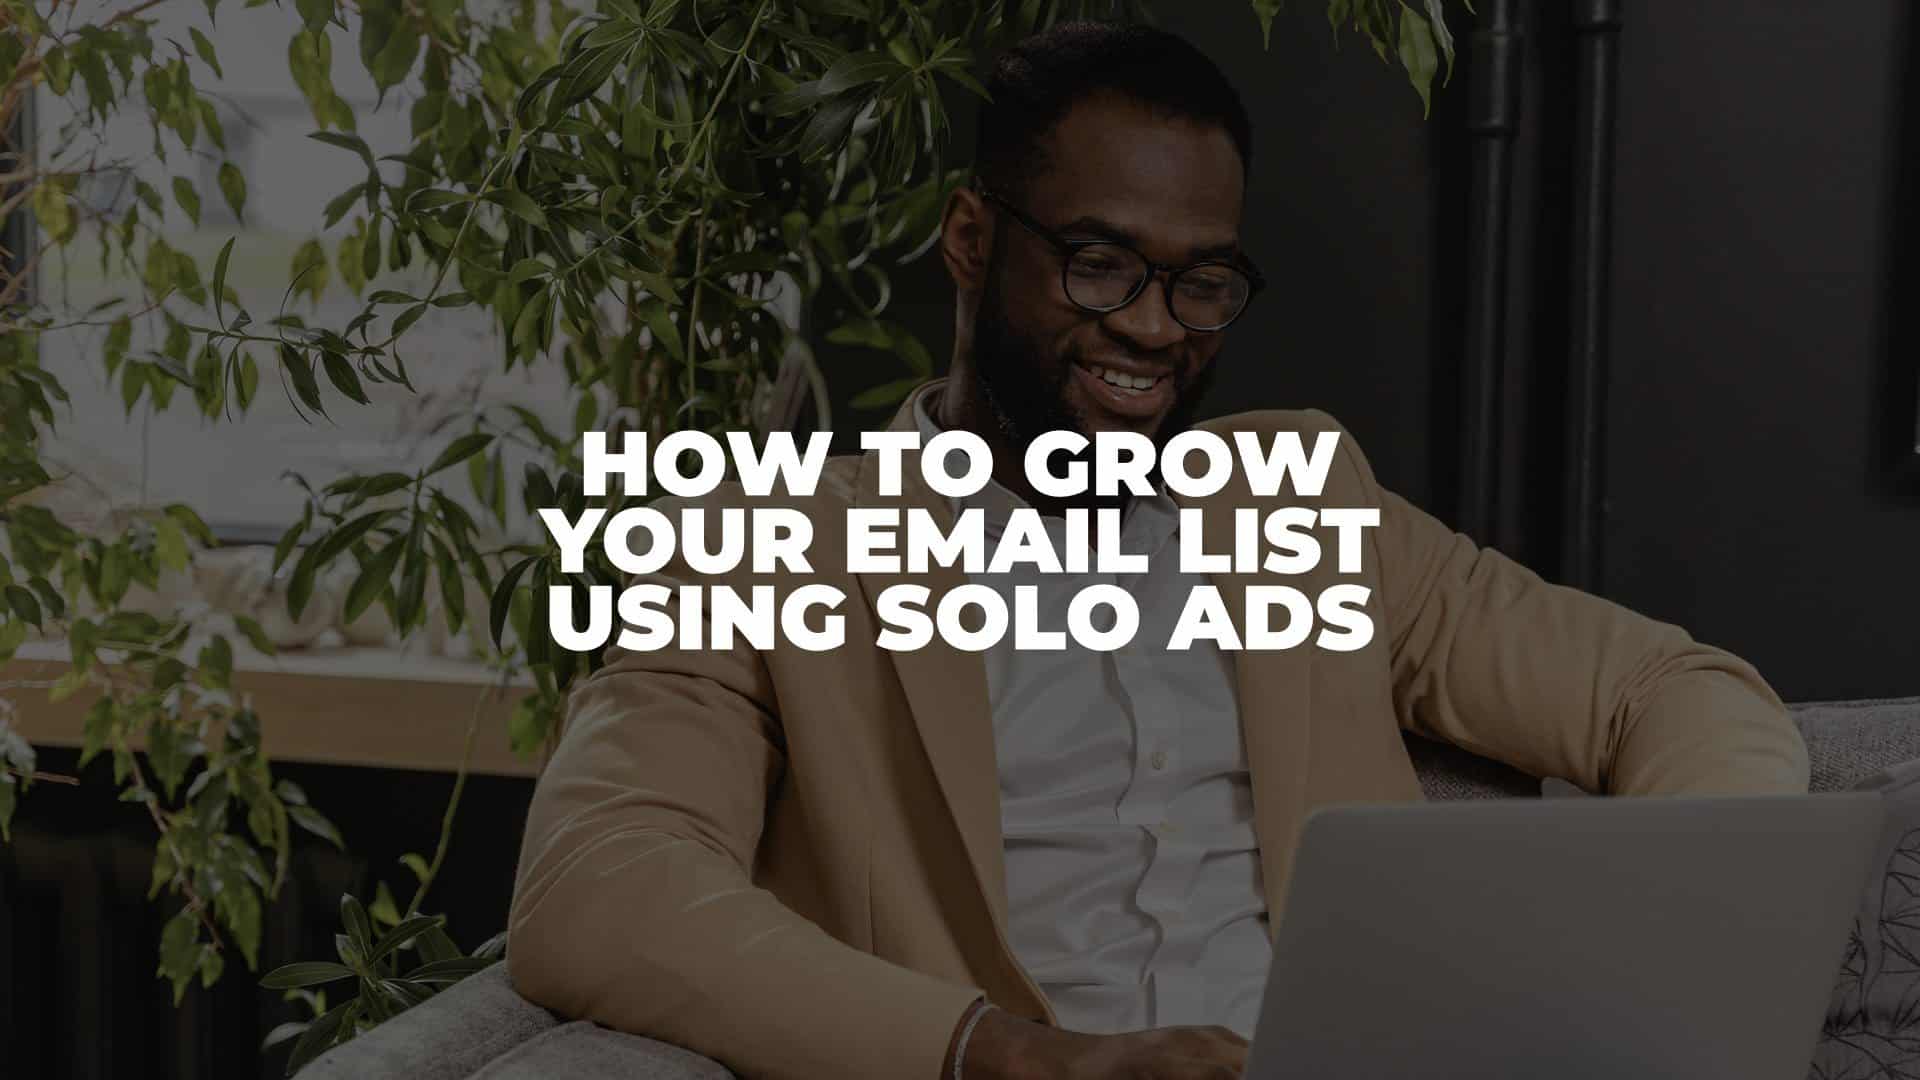 How to Grow Your Email List Using Solo Ads - Featured Image